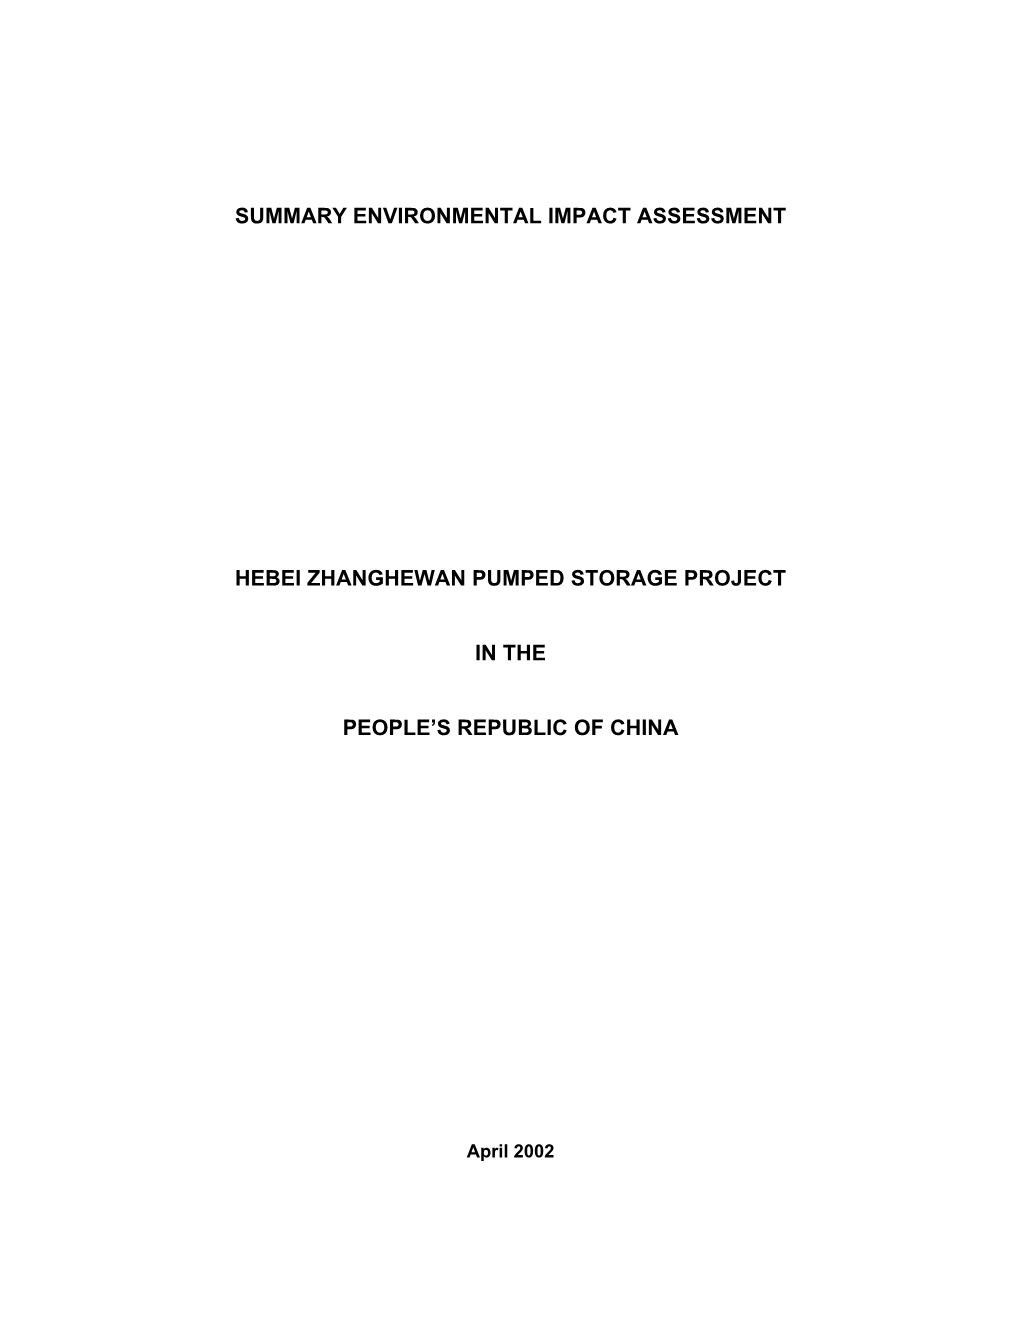 Summary Environmental Impact Assessment Hebei Zhanghewan Pumped Storage Project in the People's Republic of China